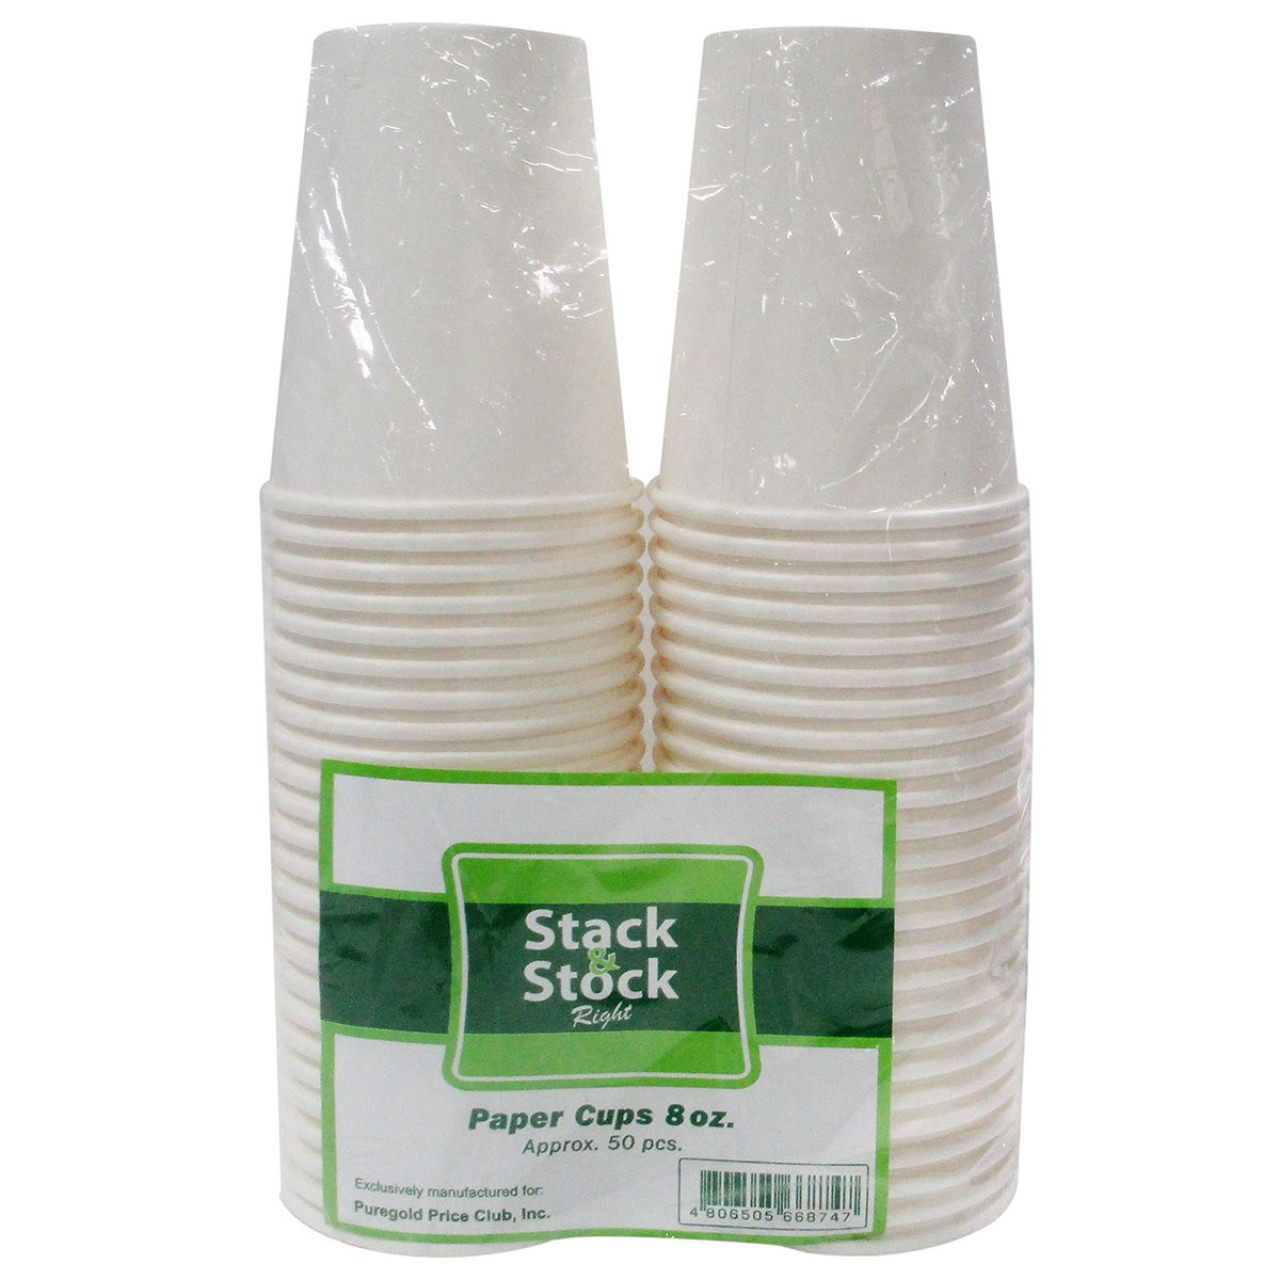 STACK&STOCK PAPER CUP 8OZ 50S